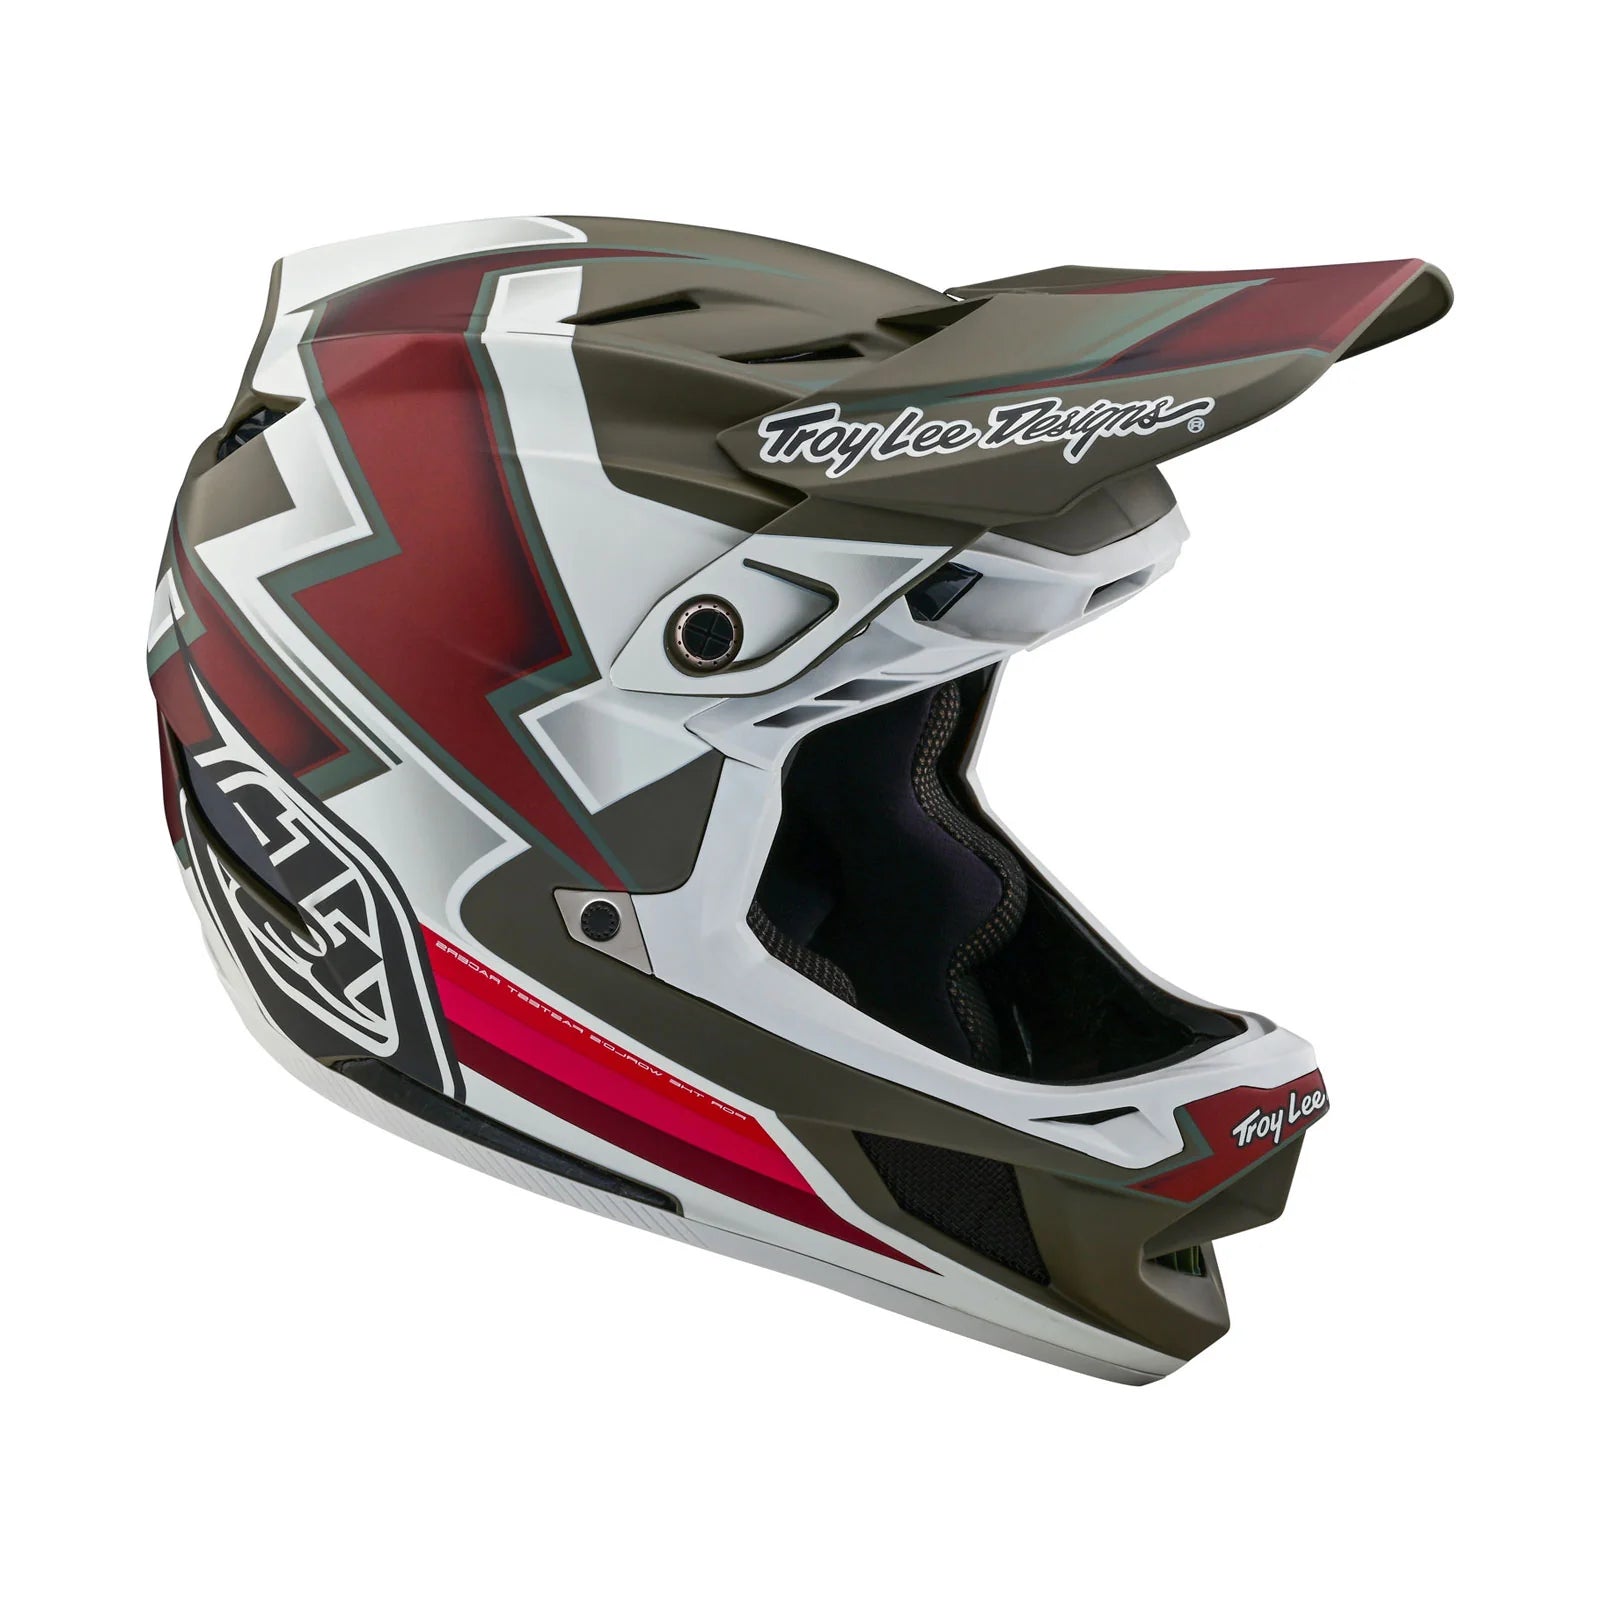 A TLD D4 AS Composite Helmet W/MIPS Ever Tarmac with a red and white design featuring the Mips system for enhanced safety.